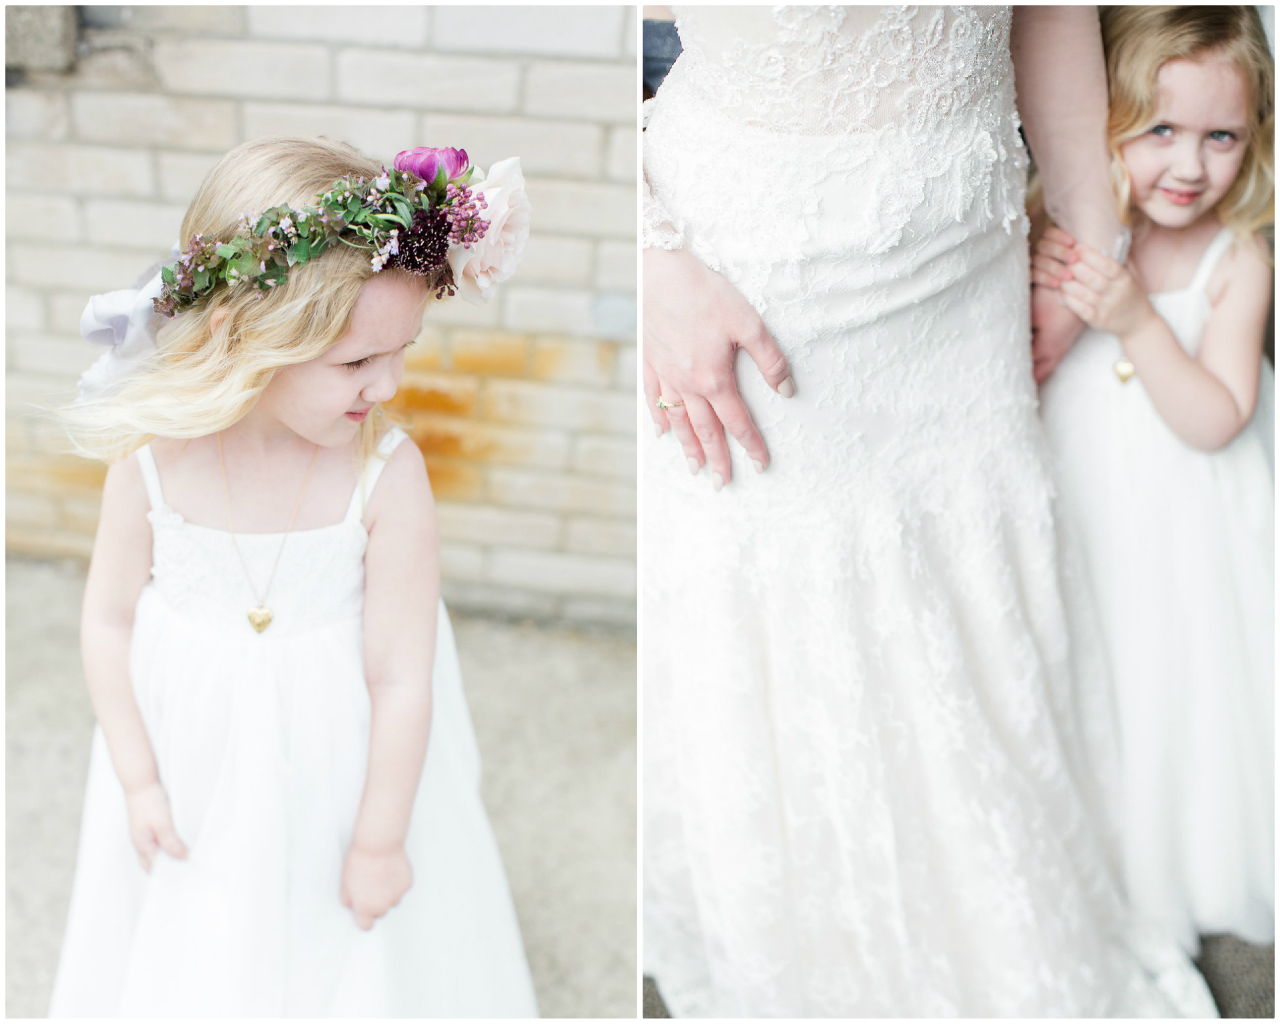 Flowergirl | The Day's Design | Ashley Slater Photography